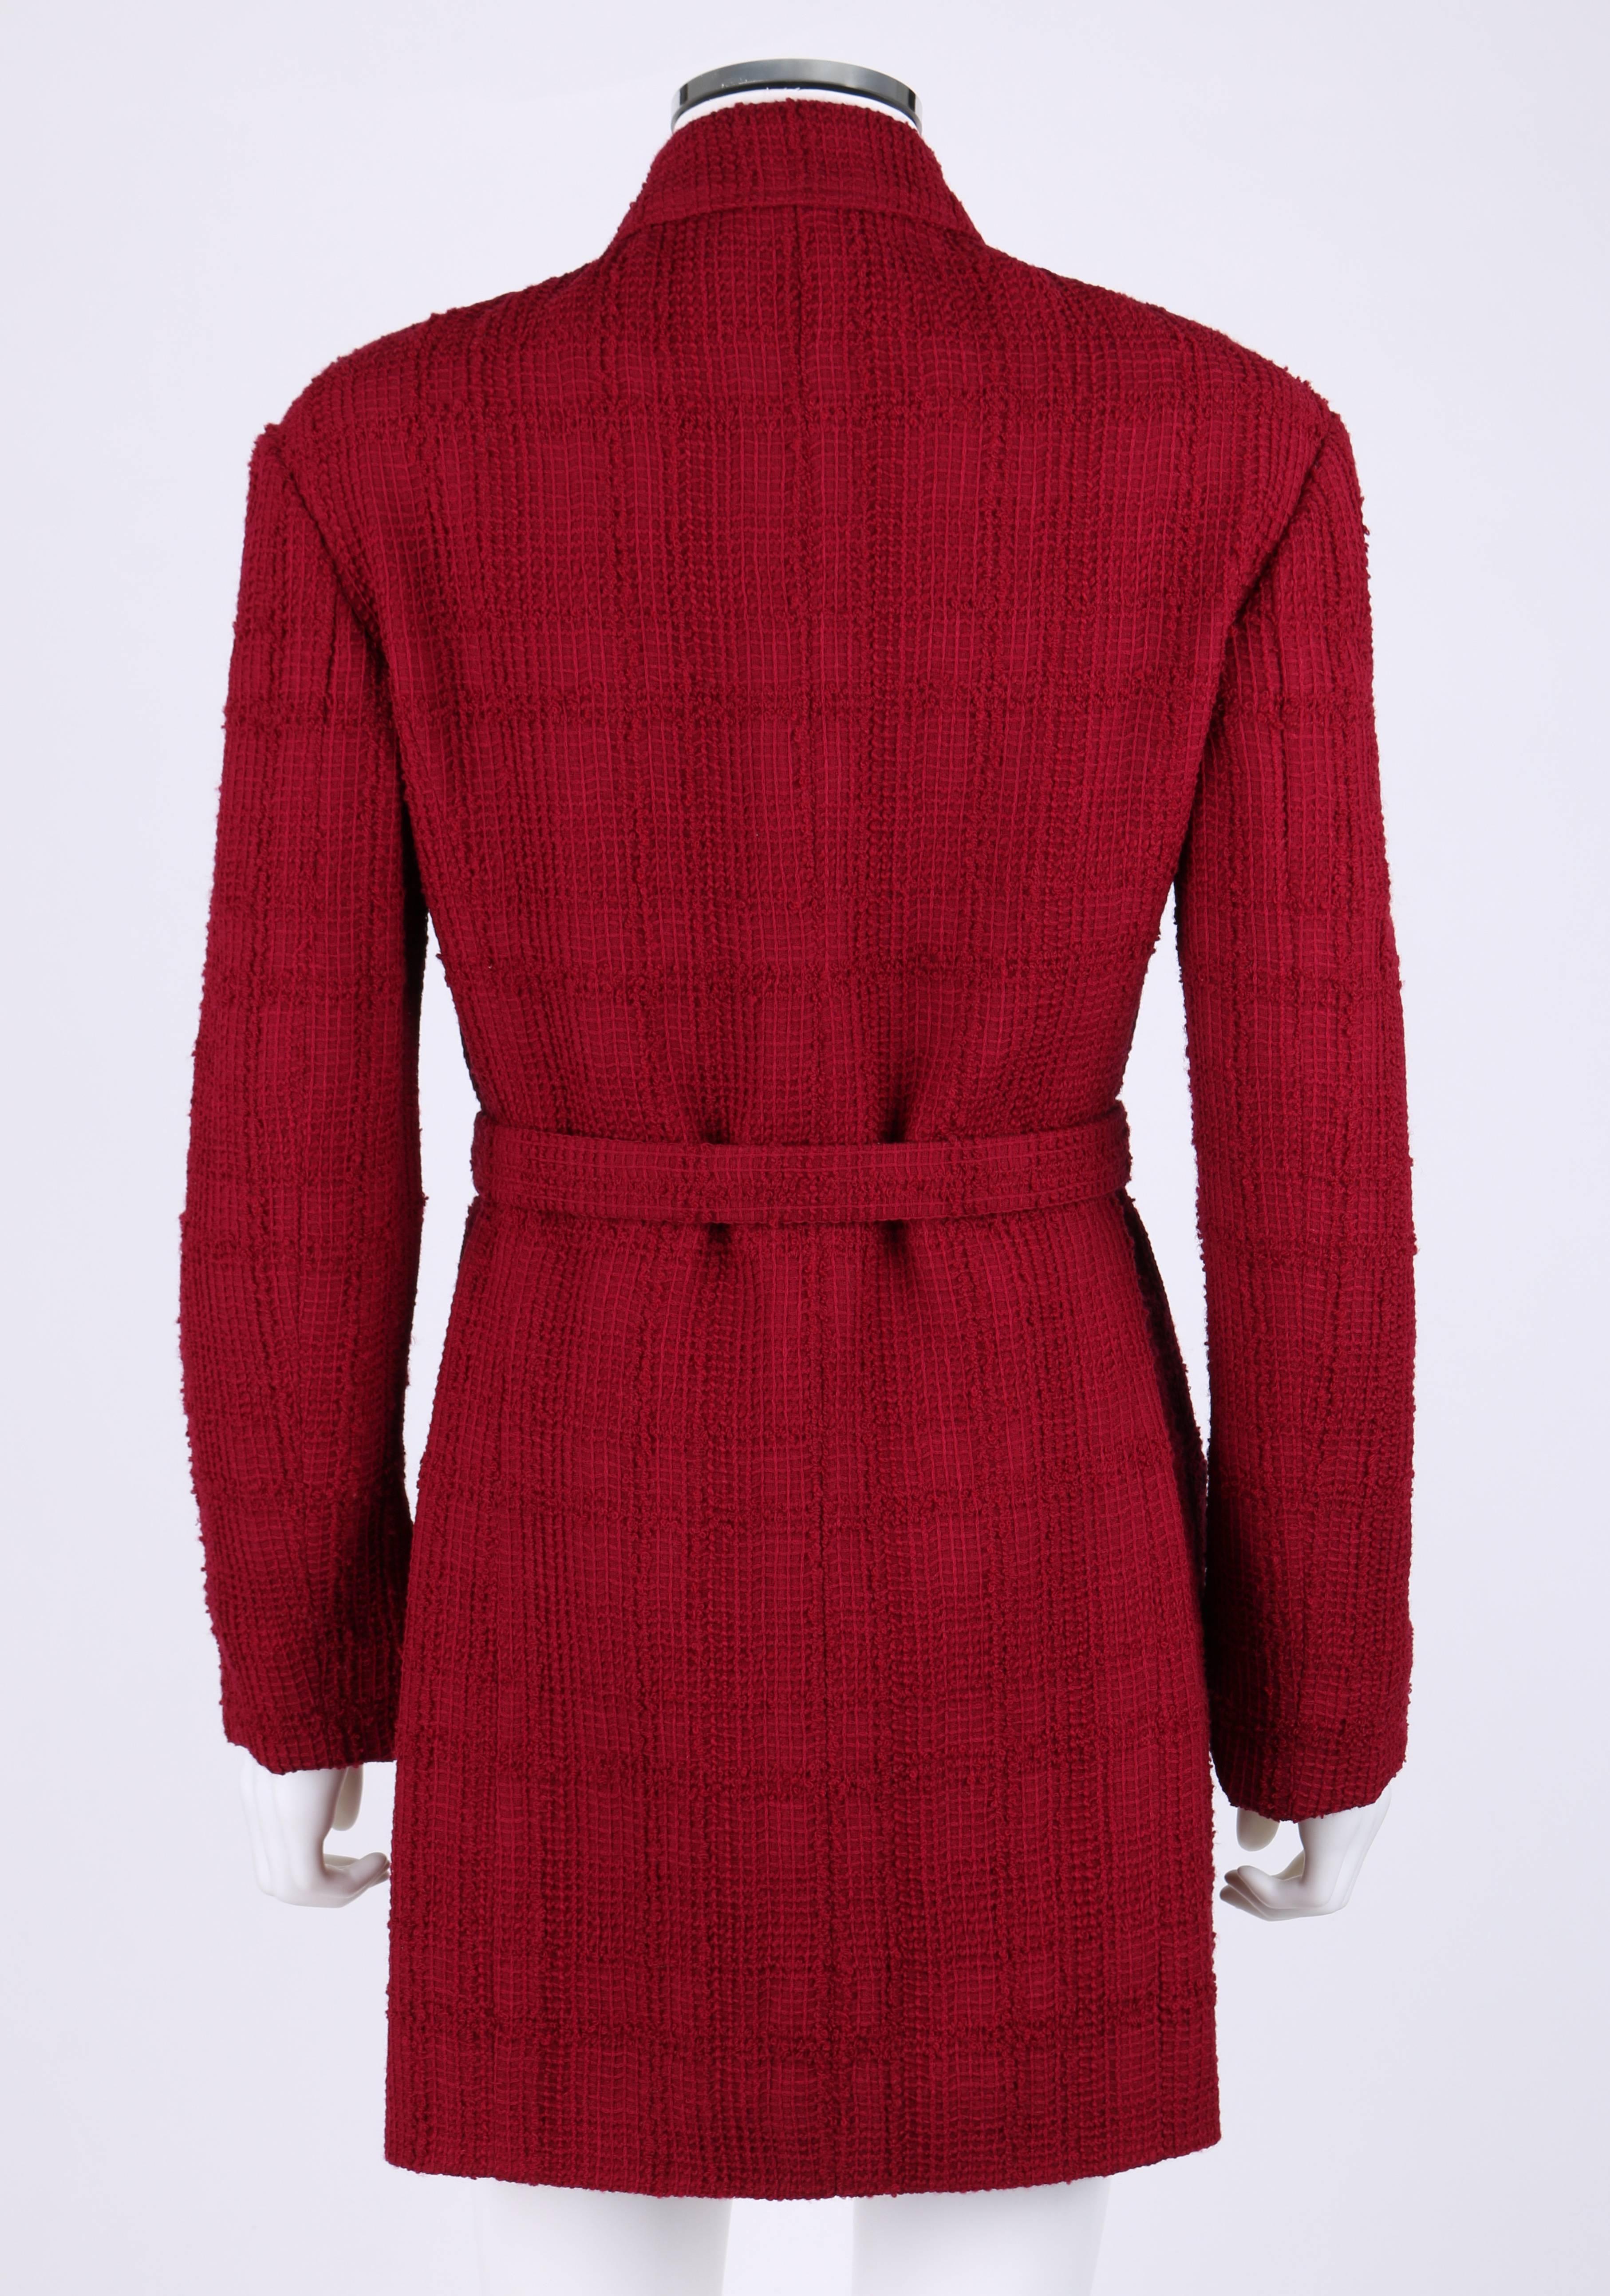 CHANEL Boutique A/W 1998 Garnet Red Plaid Boucle Wool Two Button Jacket w/ Belt 1